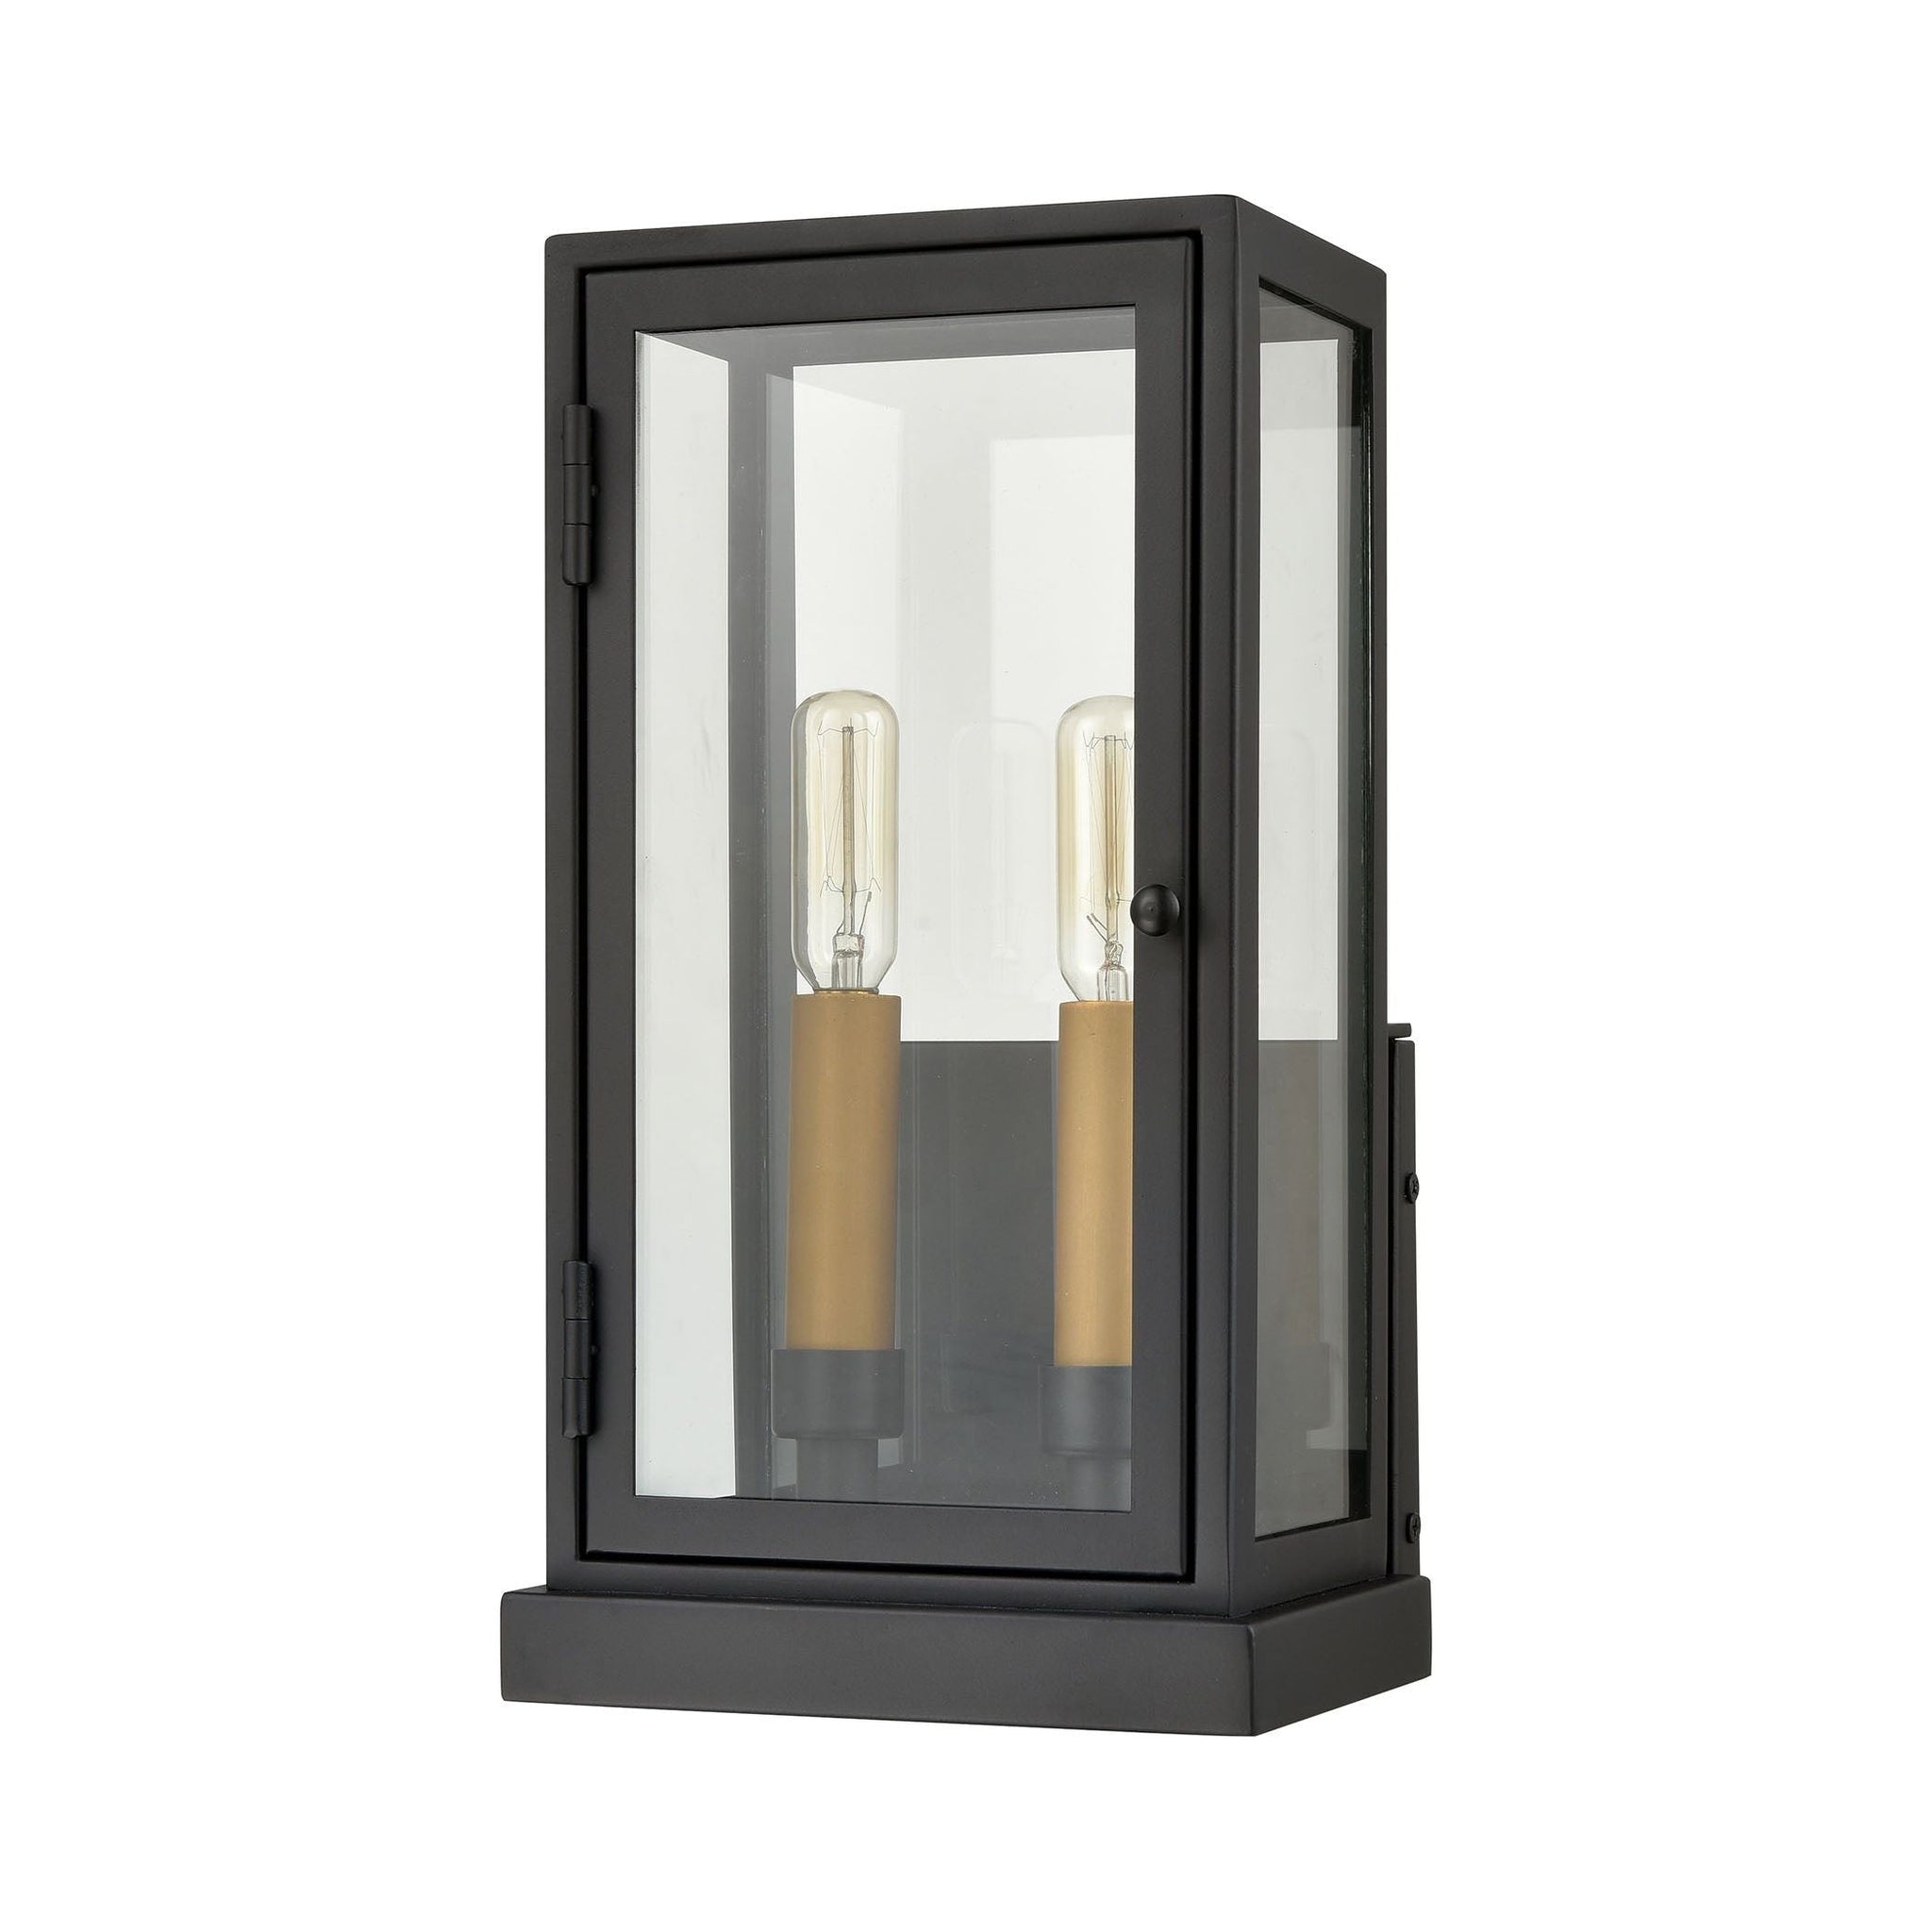 Foundation 13" High 2-Light Outdoor Sconce